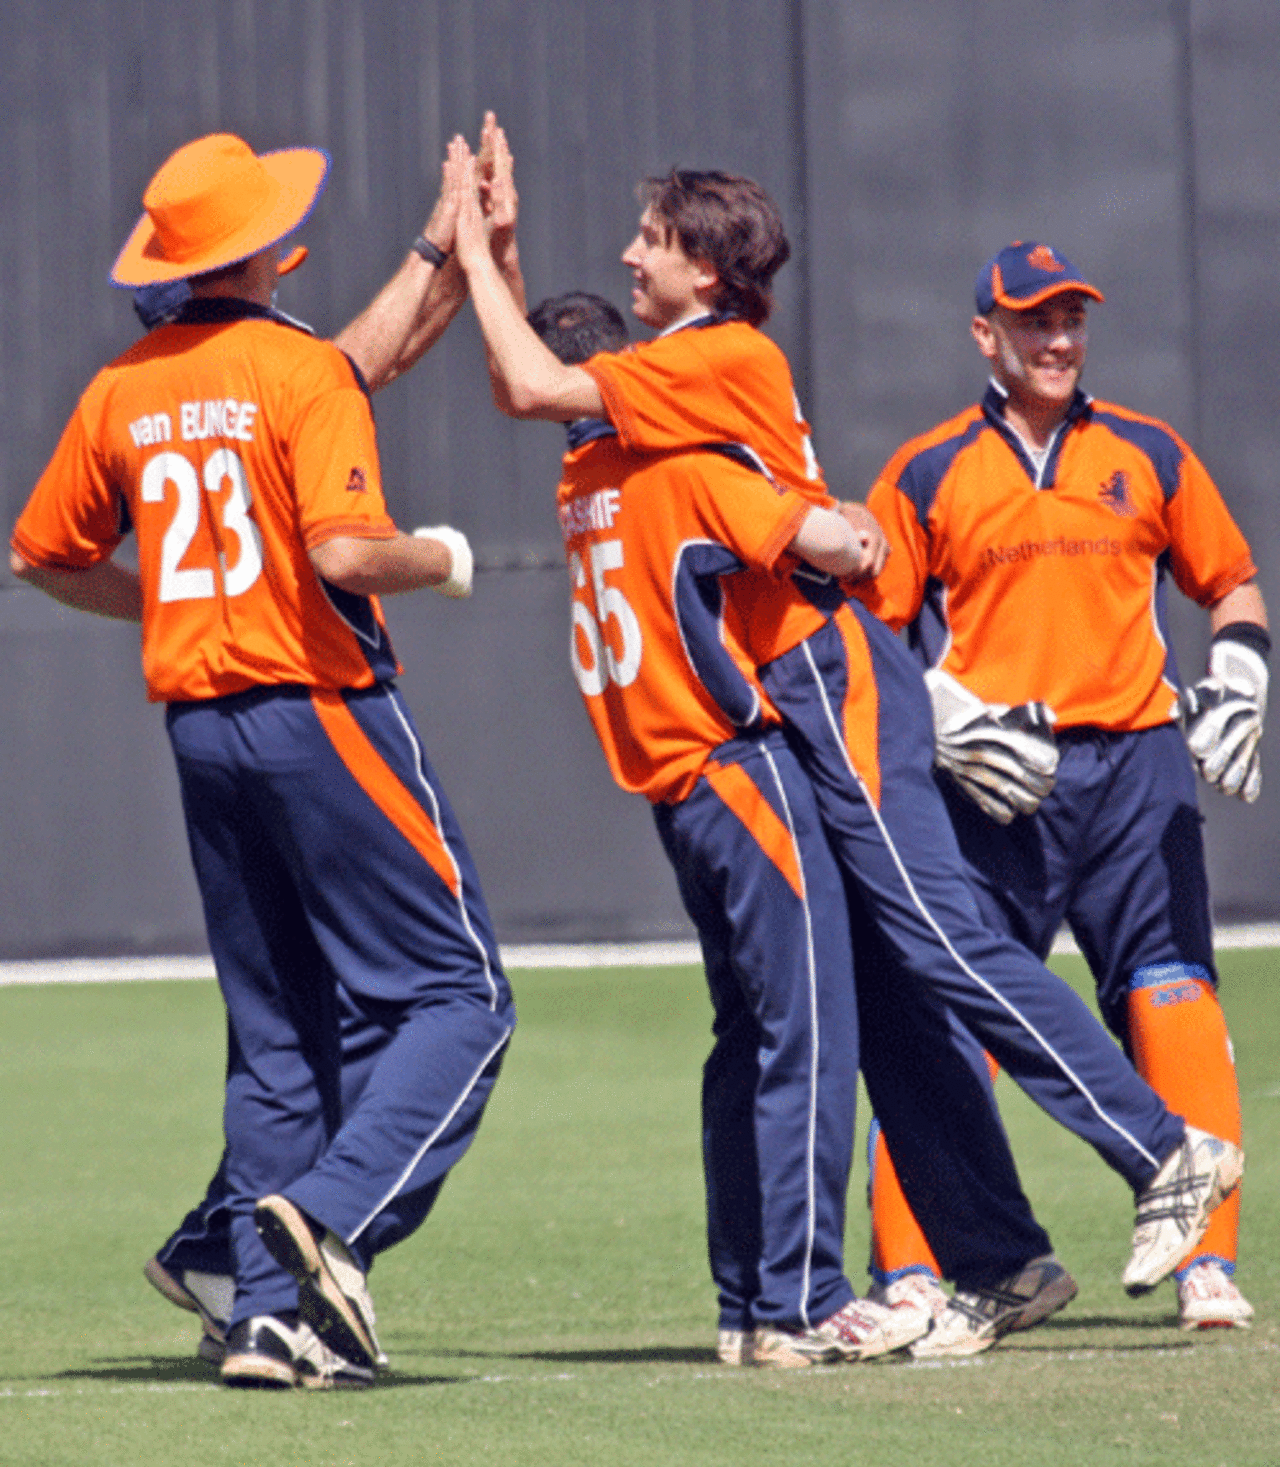 Mark Jonkman is congratulated after taking a wicket, Afghanistan v Netherlands, ICC World Twenty20 Qualifiers, February 12, 2010